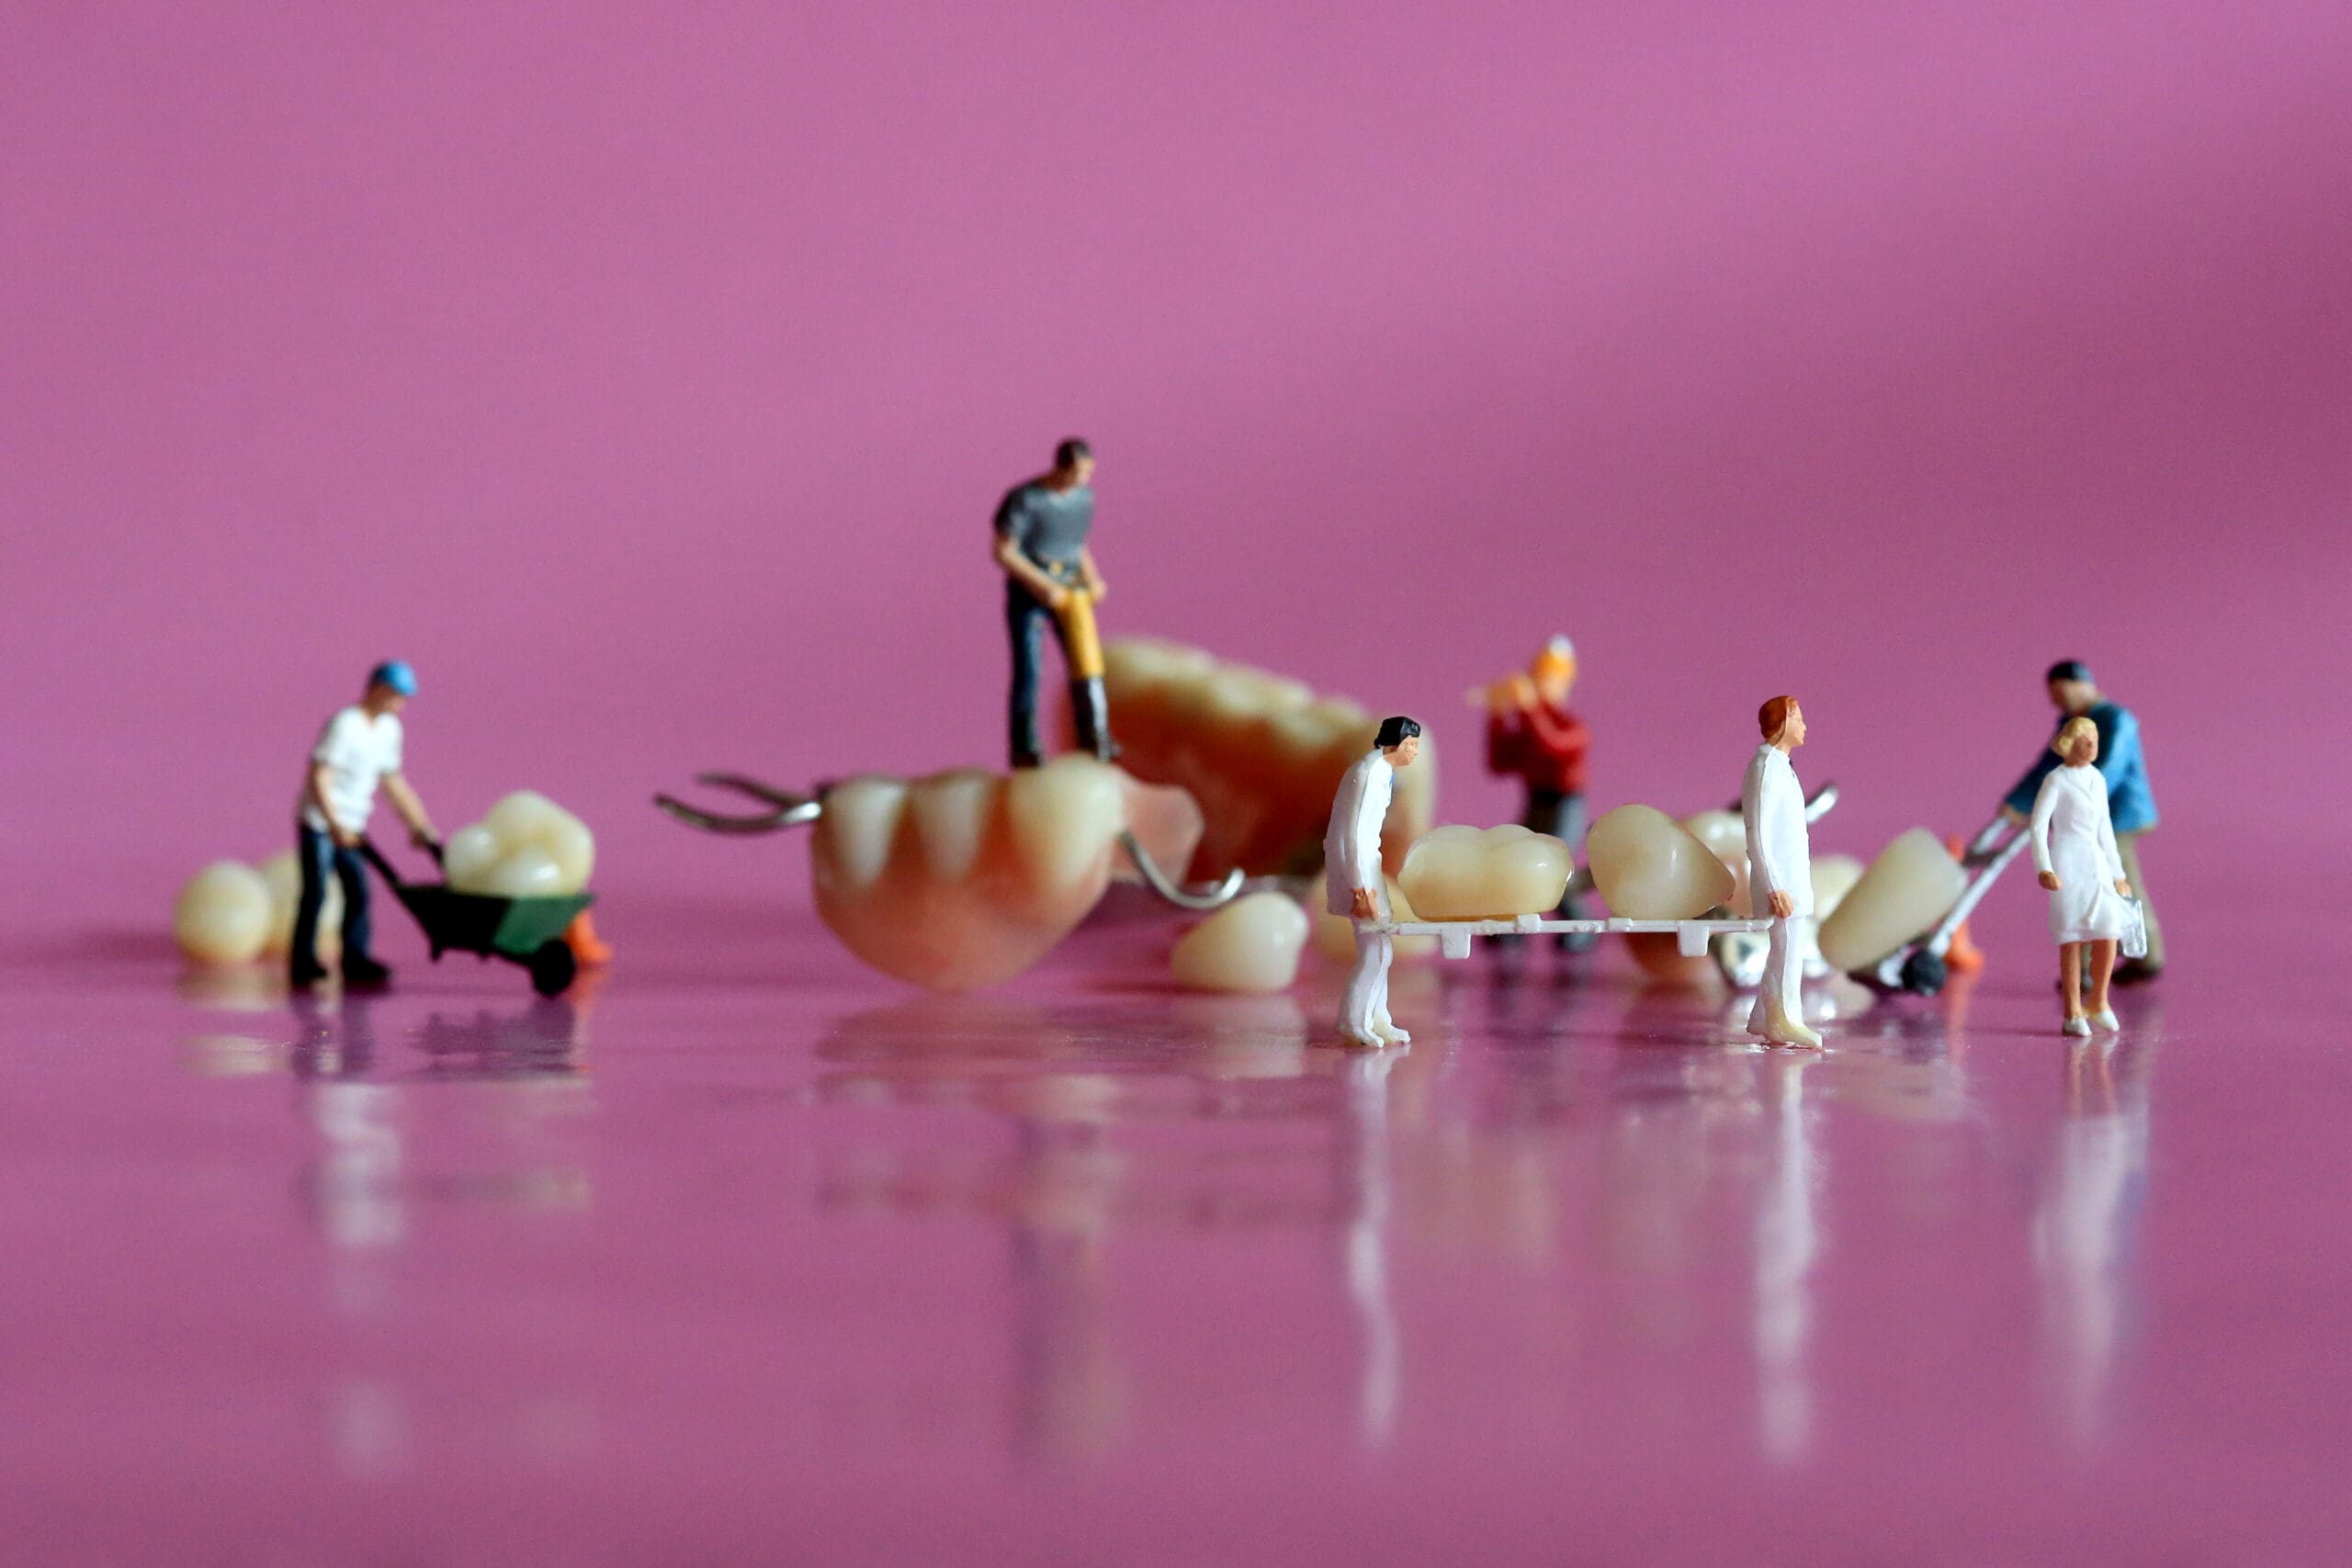 Miniature figurines on a pink background showcasing general dentistry.